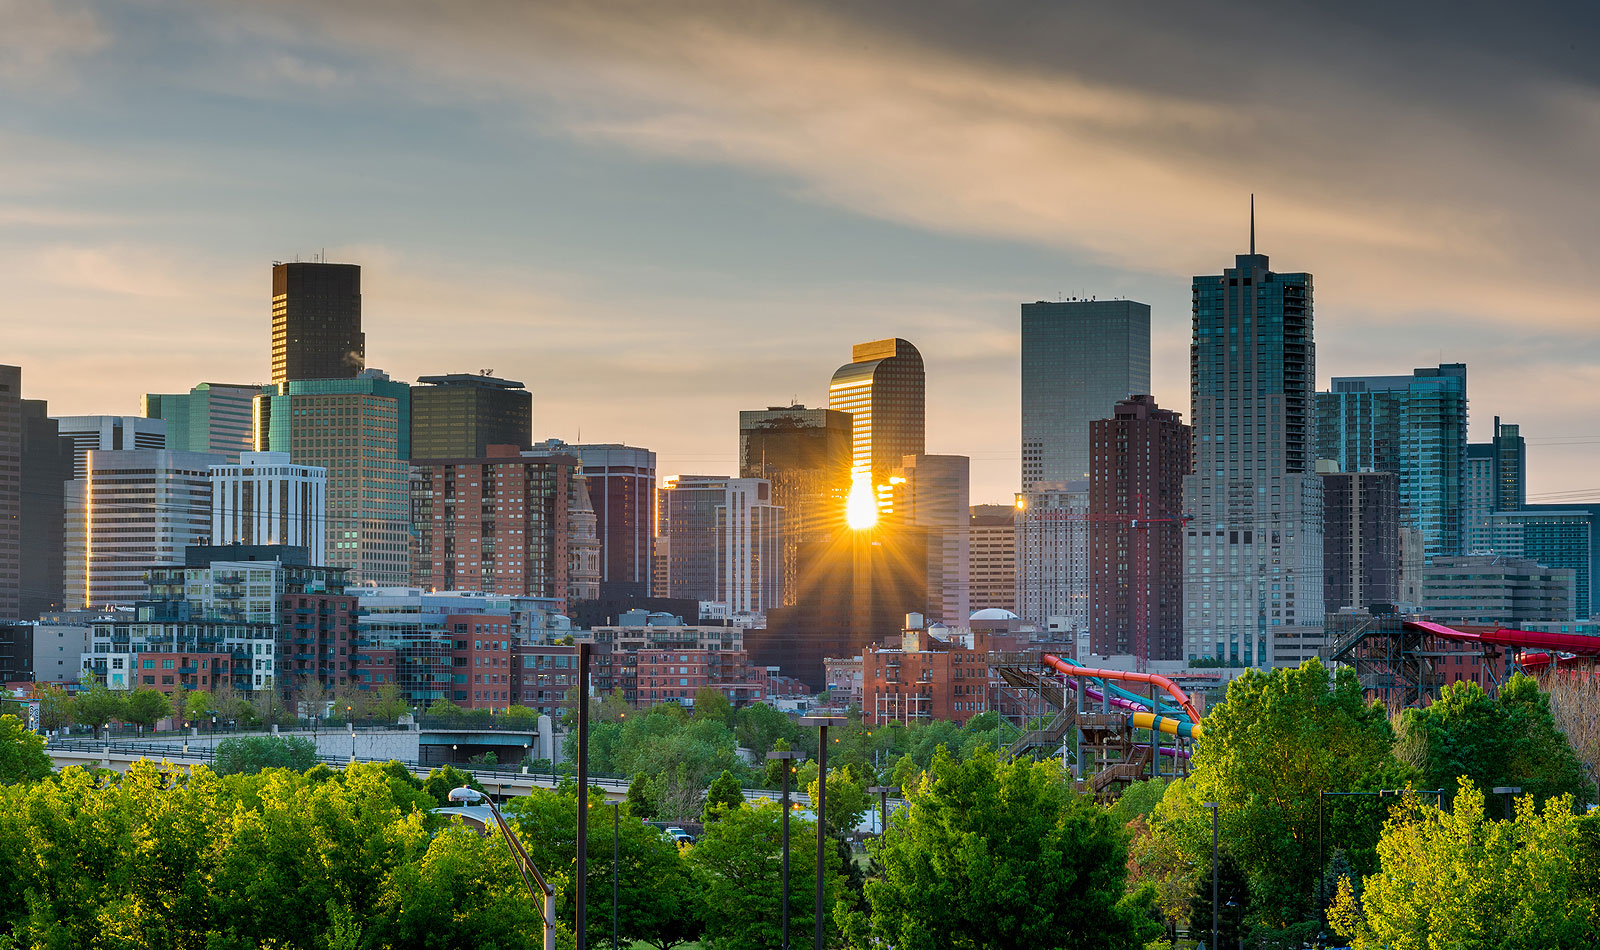 Sunset view of skyscrapers in Denver Colorado